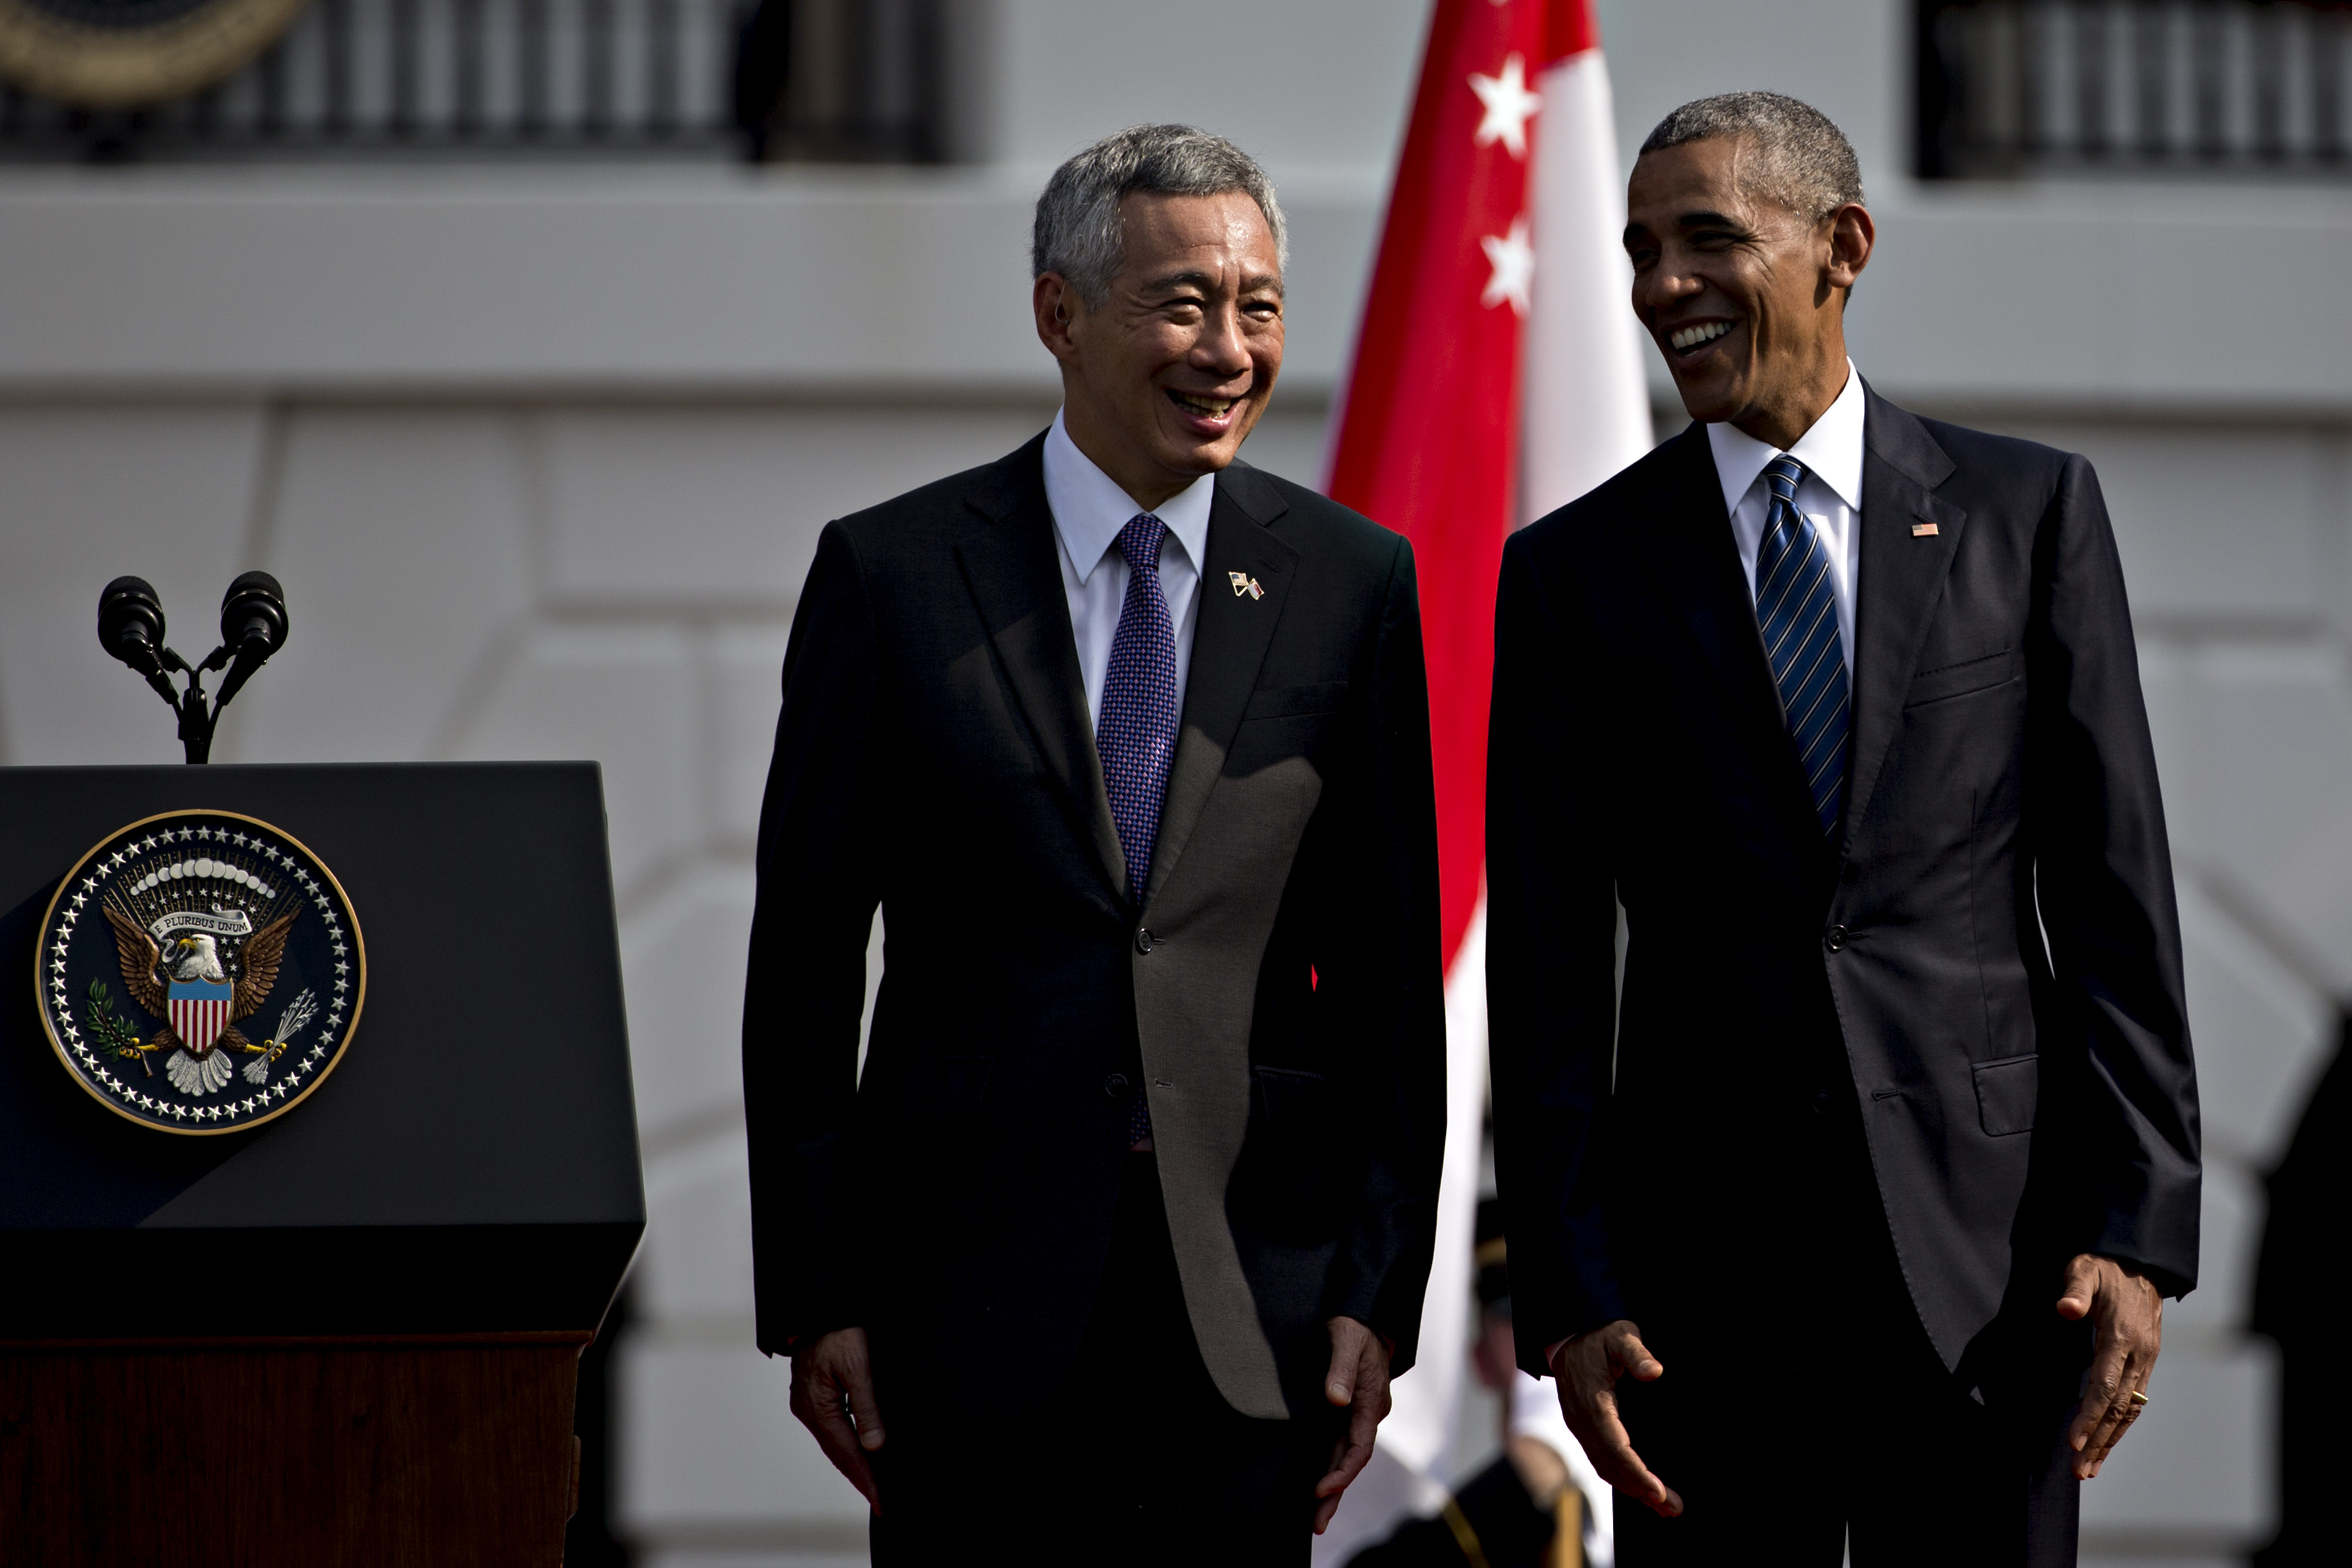 U.S. President Barack Obama, right, and Lee Hsien Loong, Singapore's prime minster, talk while participating in an official arrival ceremony on the South Lawn of the White House in Washington, D.C., U.S., on Tuesday, Aug. 2, 2016. The occasion marks first official visit by a Singapore prime minister since 1985. Photographer: Andrew Harrer/Bloomberg via Getty Images